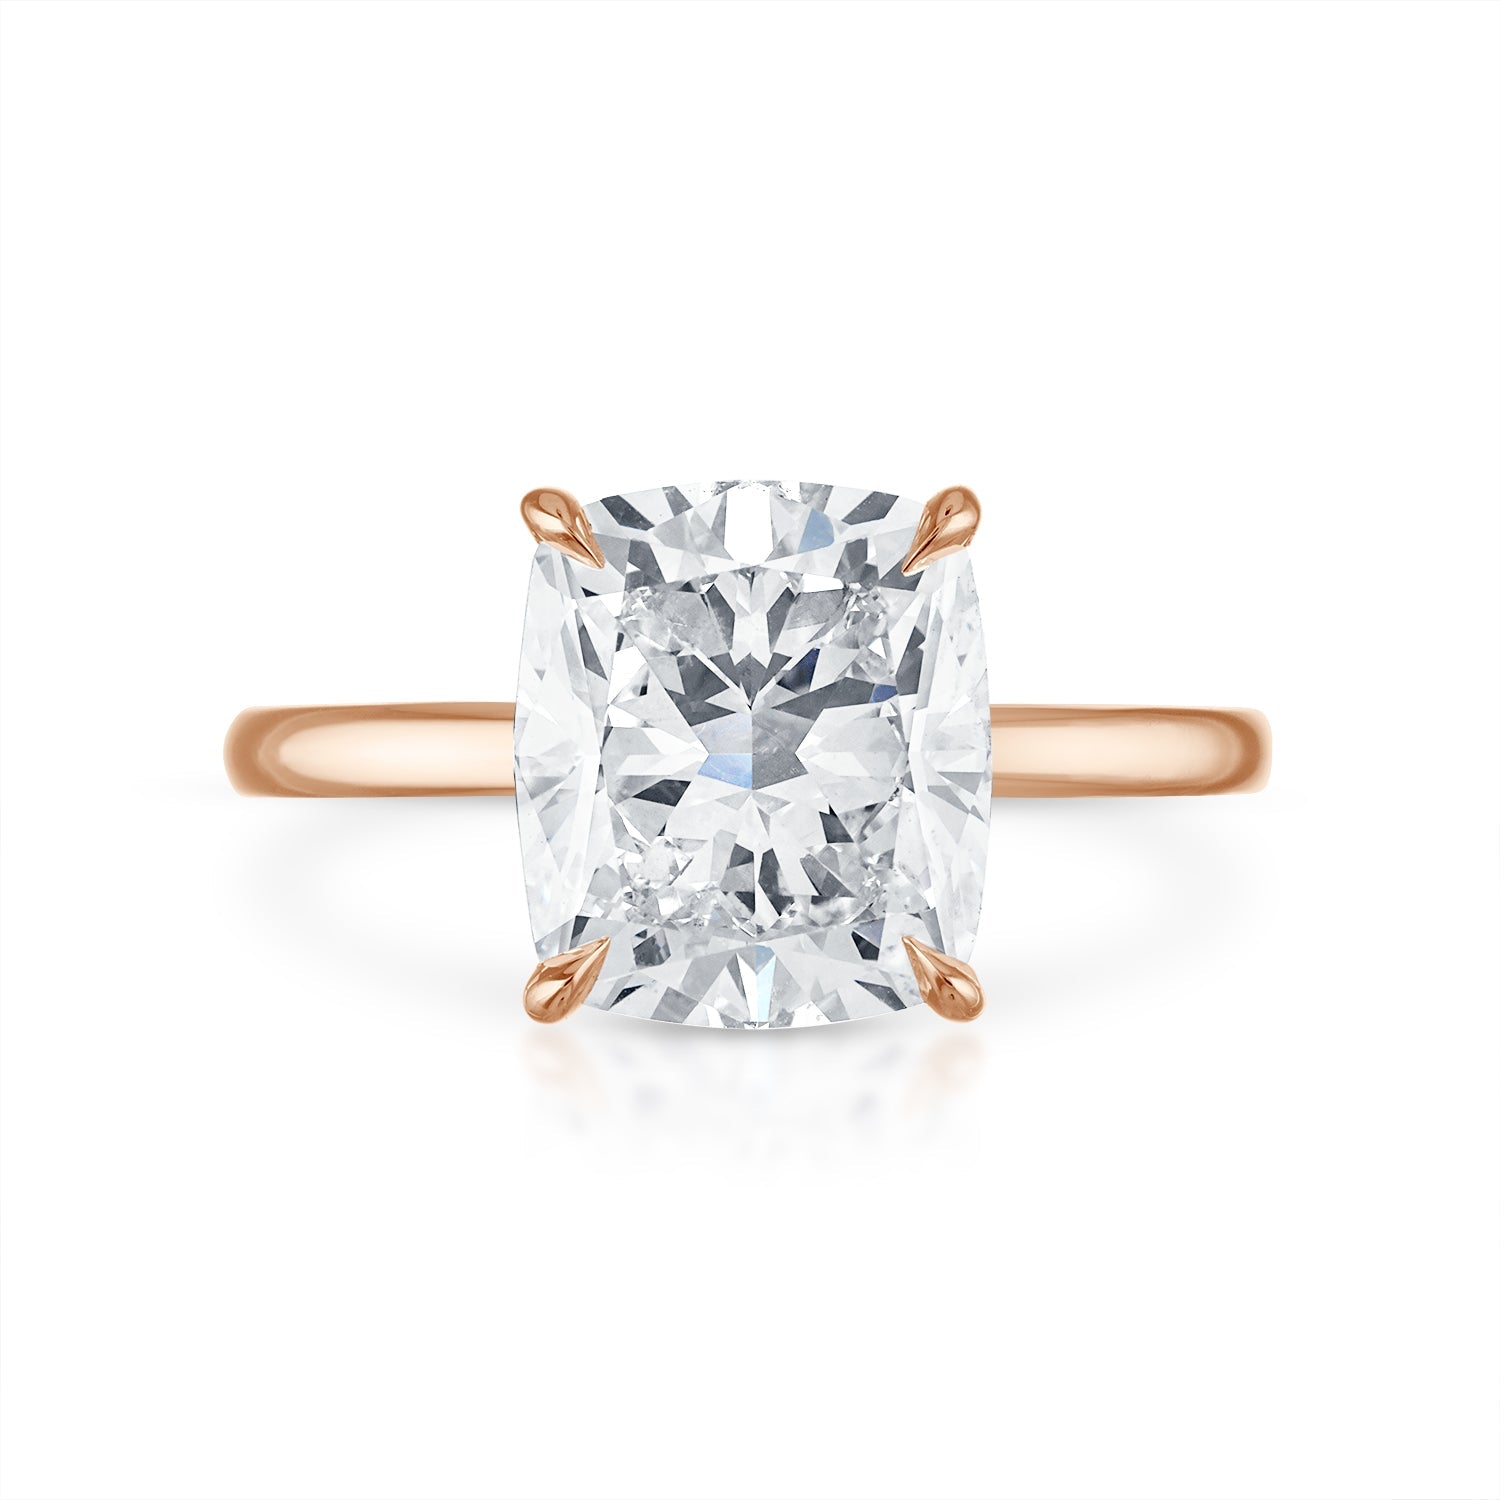 cushion cut solitaire pave engagement rings